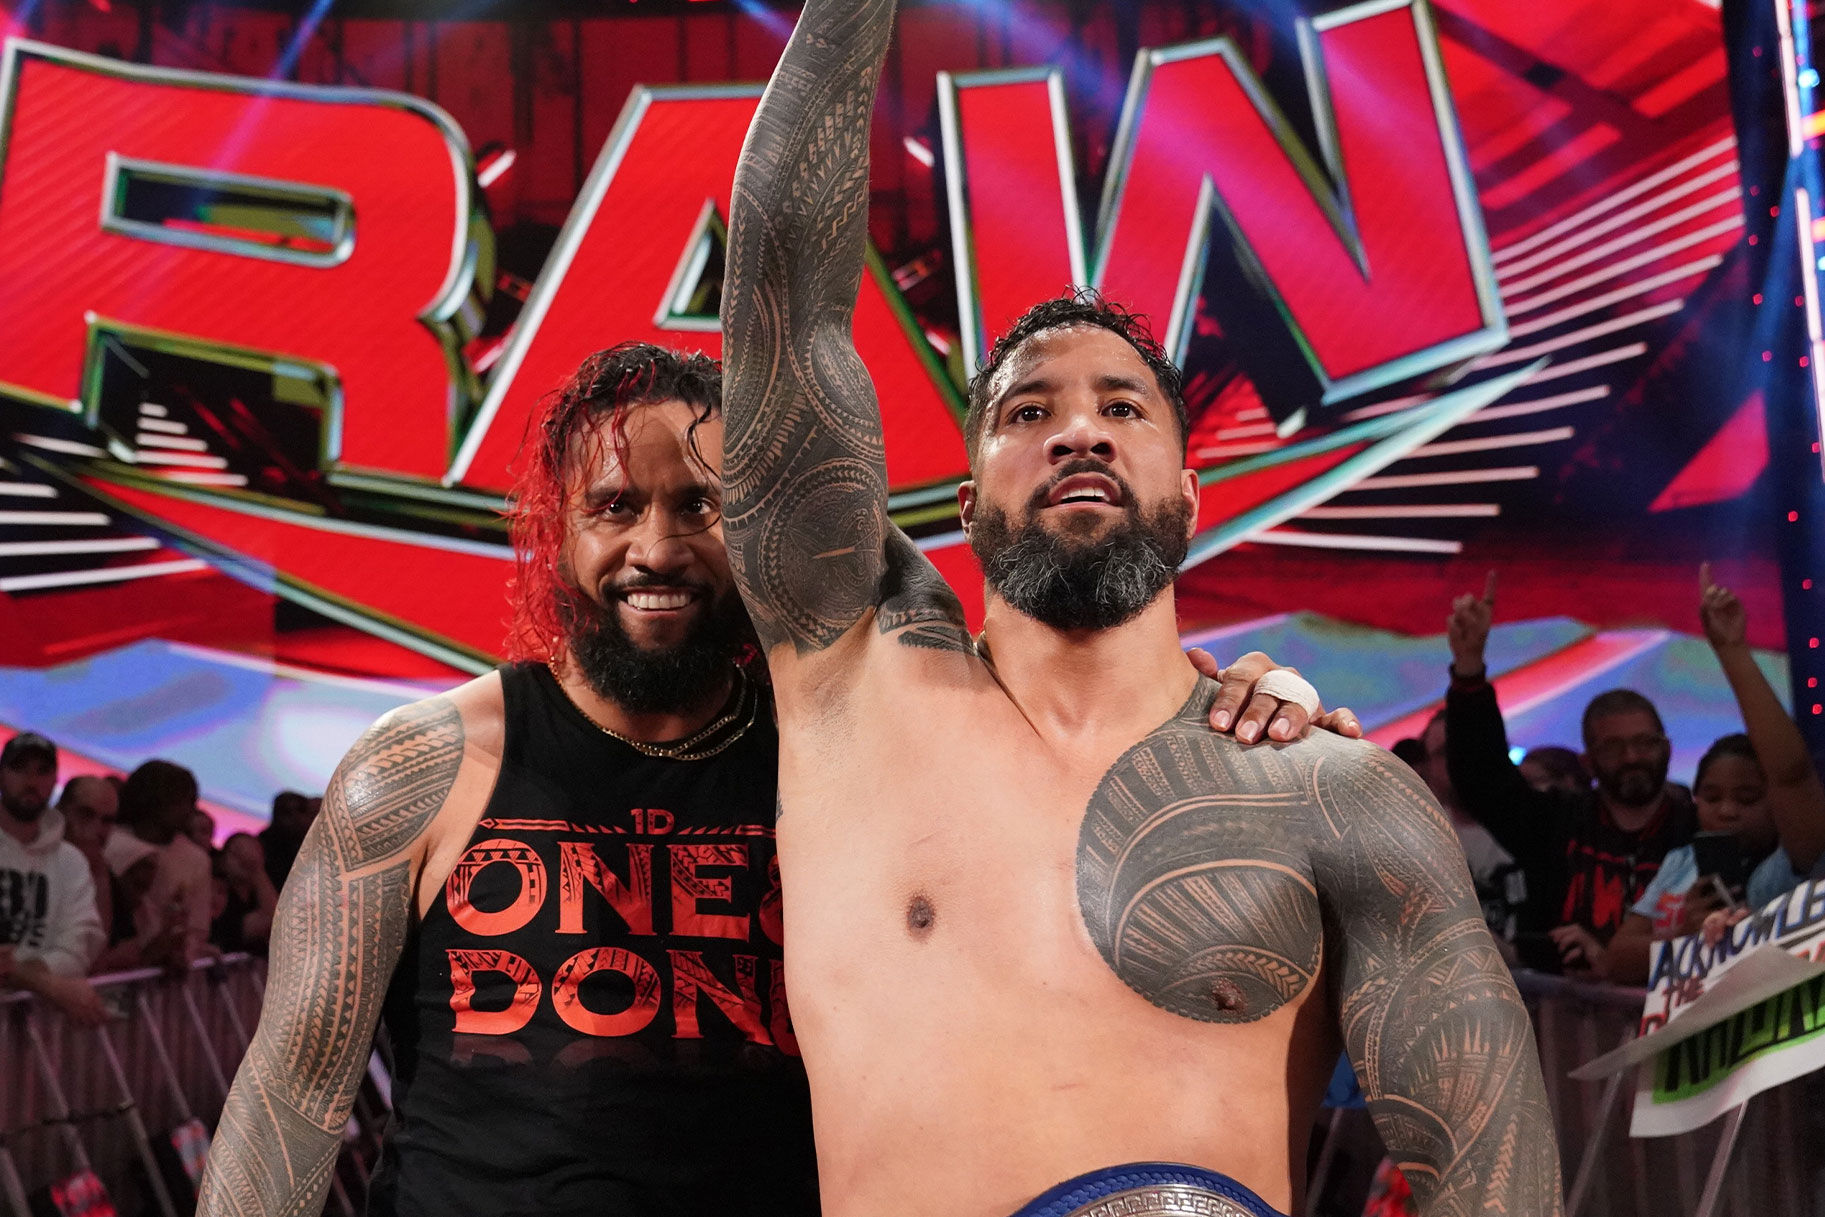 Wrestling duo The Usos